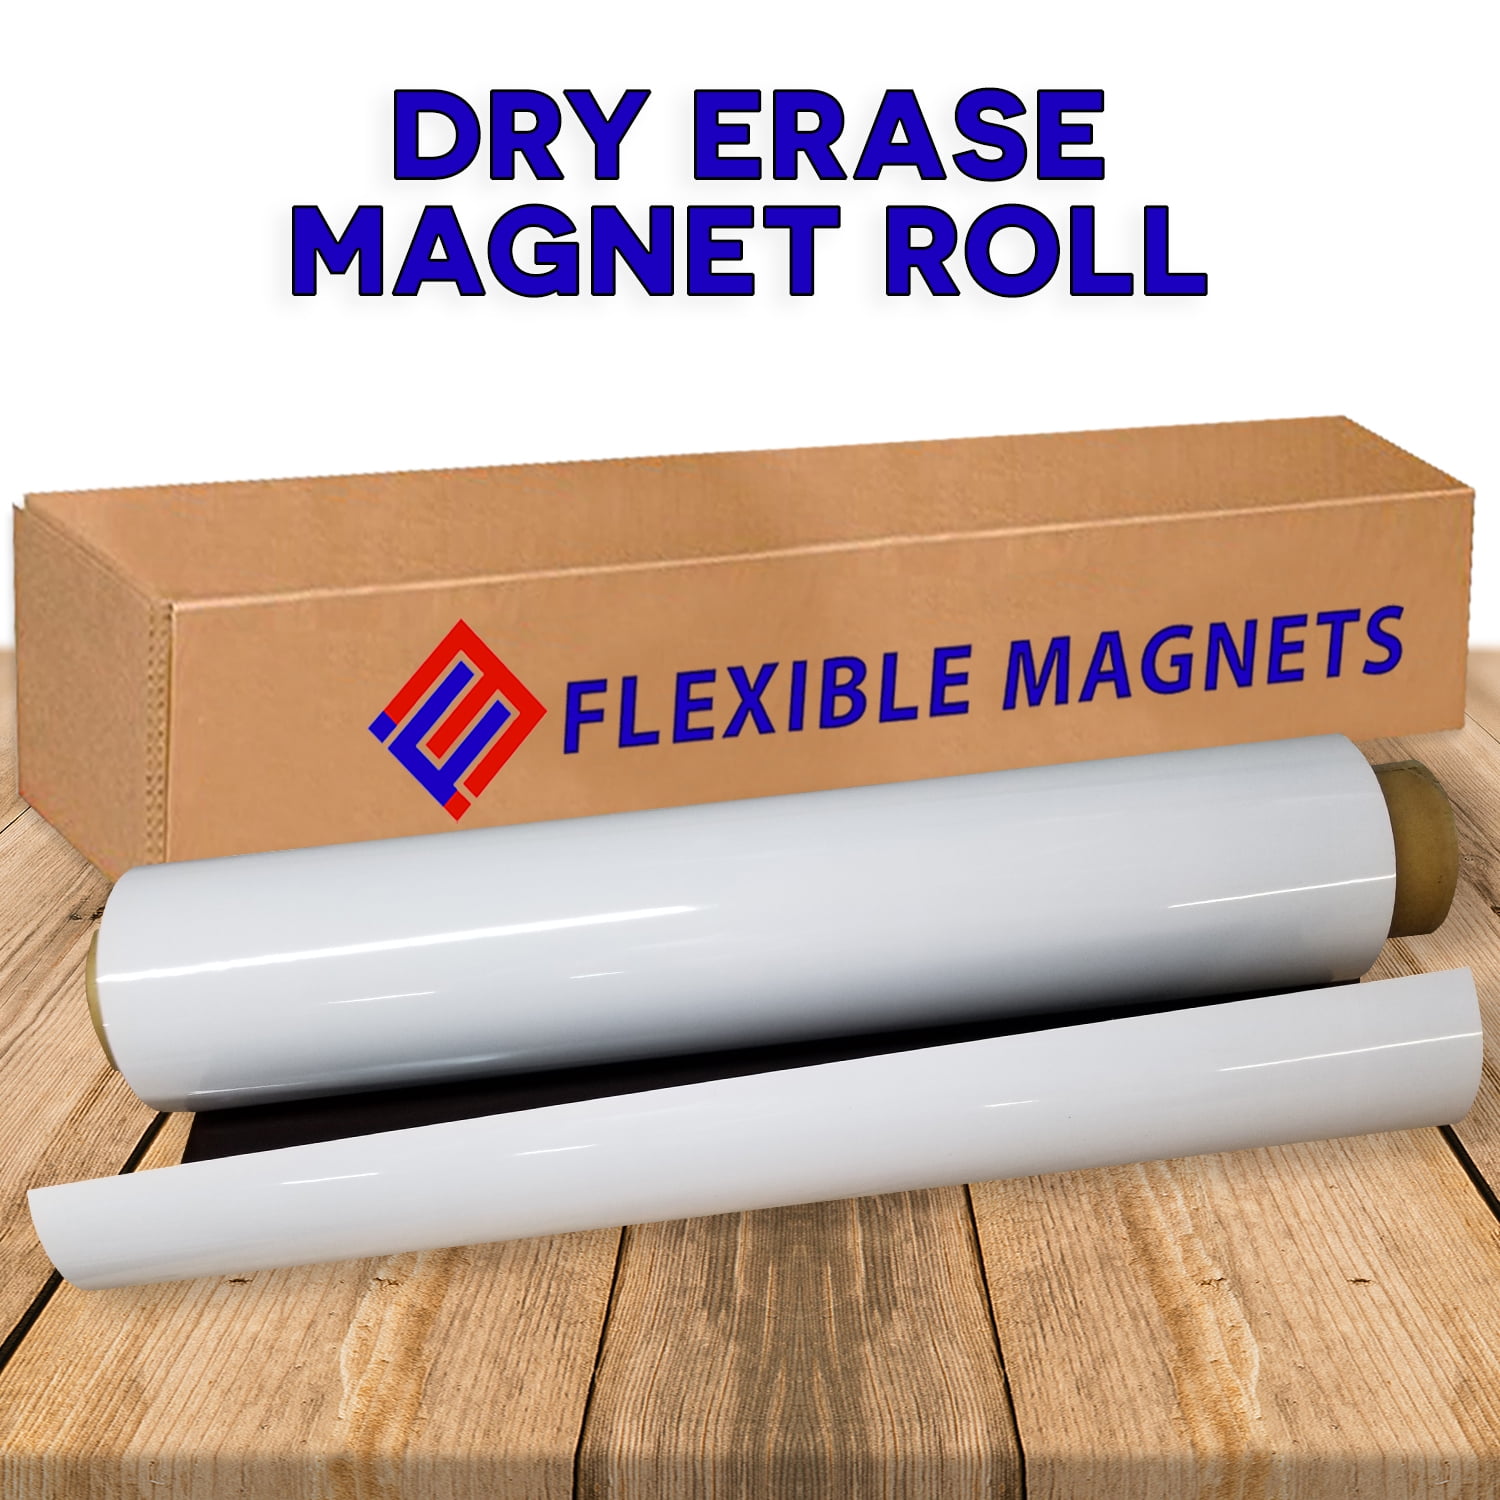 White Dry Erase Magnetic Strip Roll 6" x 25' Write on Wipe off Magnet Magnets 